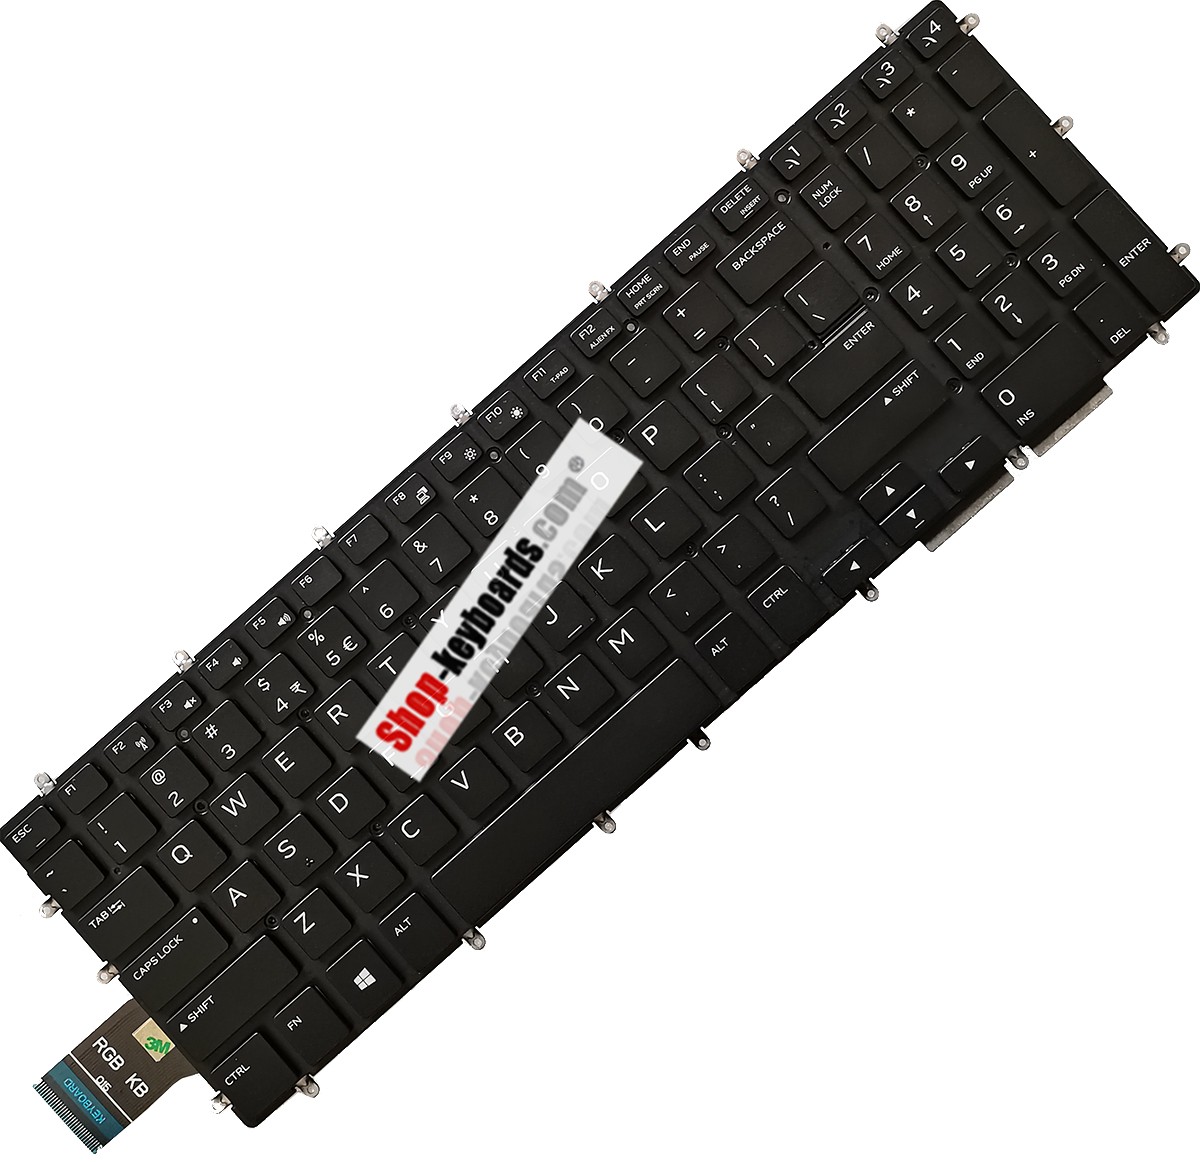 Dell ALW15M-D2746R Keyboard replacement